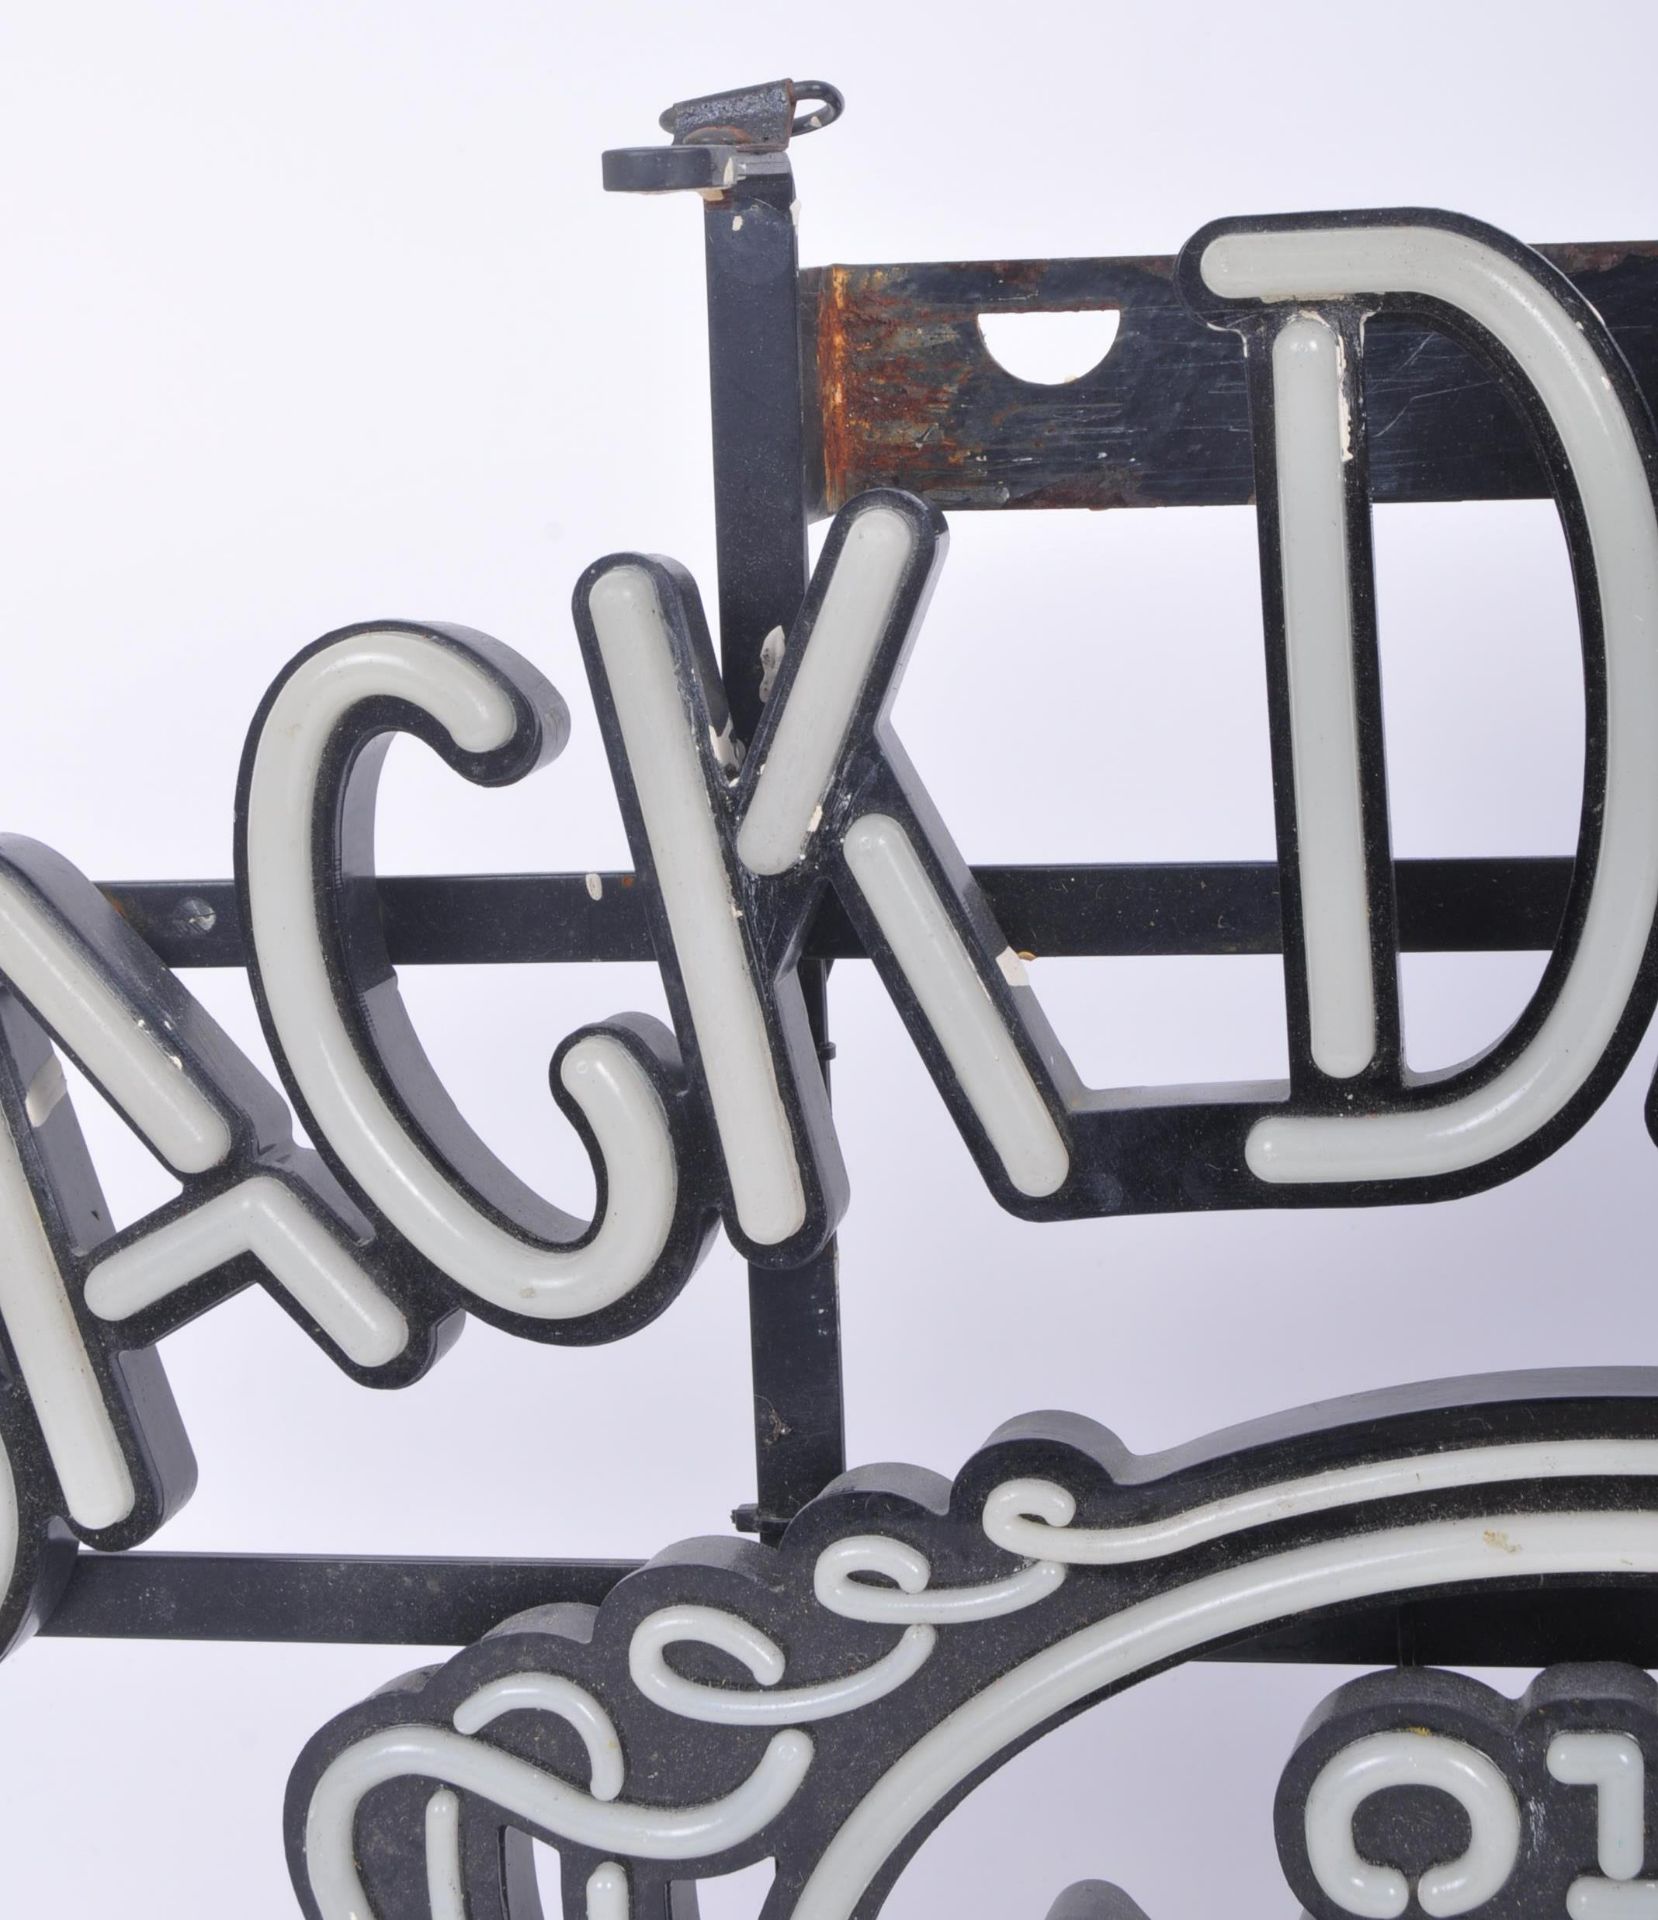 JACK DANIEL'S - CONTEMPORARY NEON STYLE LIGHT BAR SIGN - Image 4 of 8